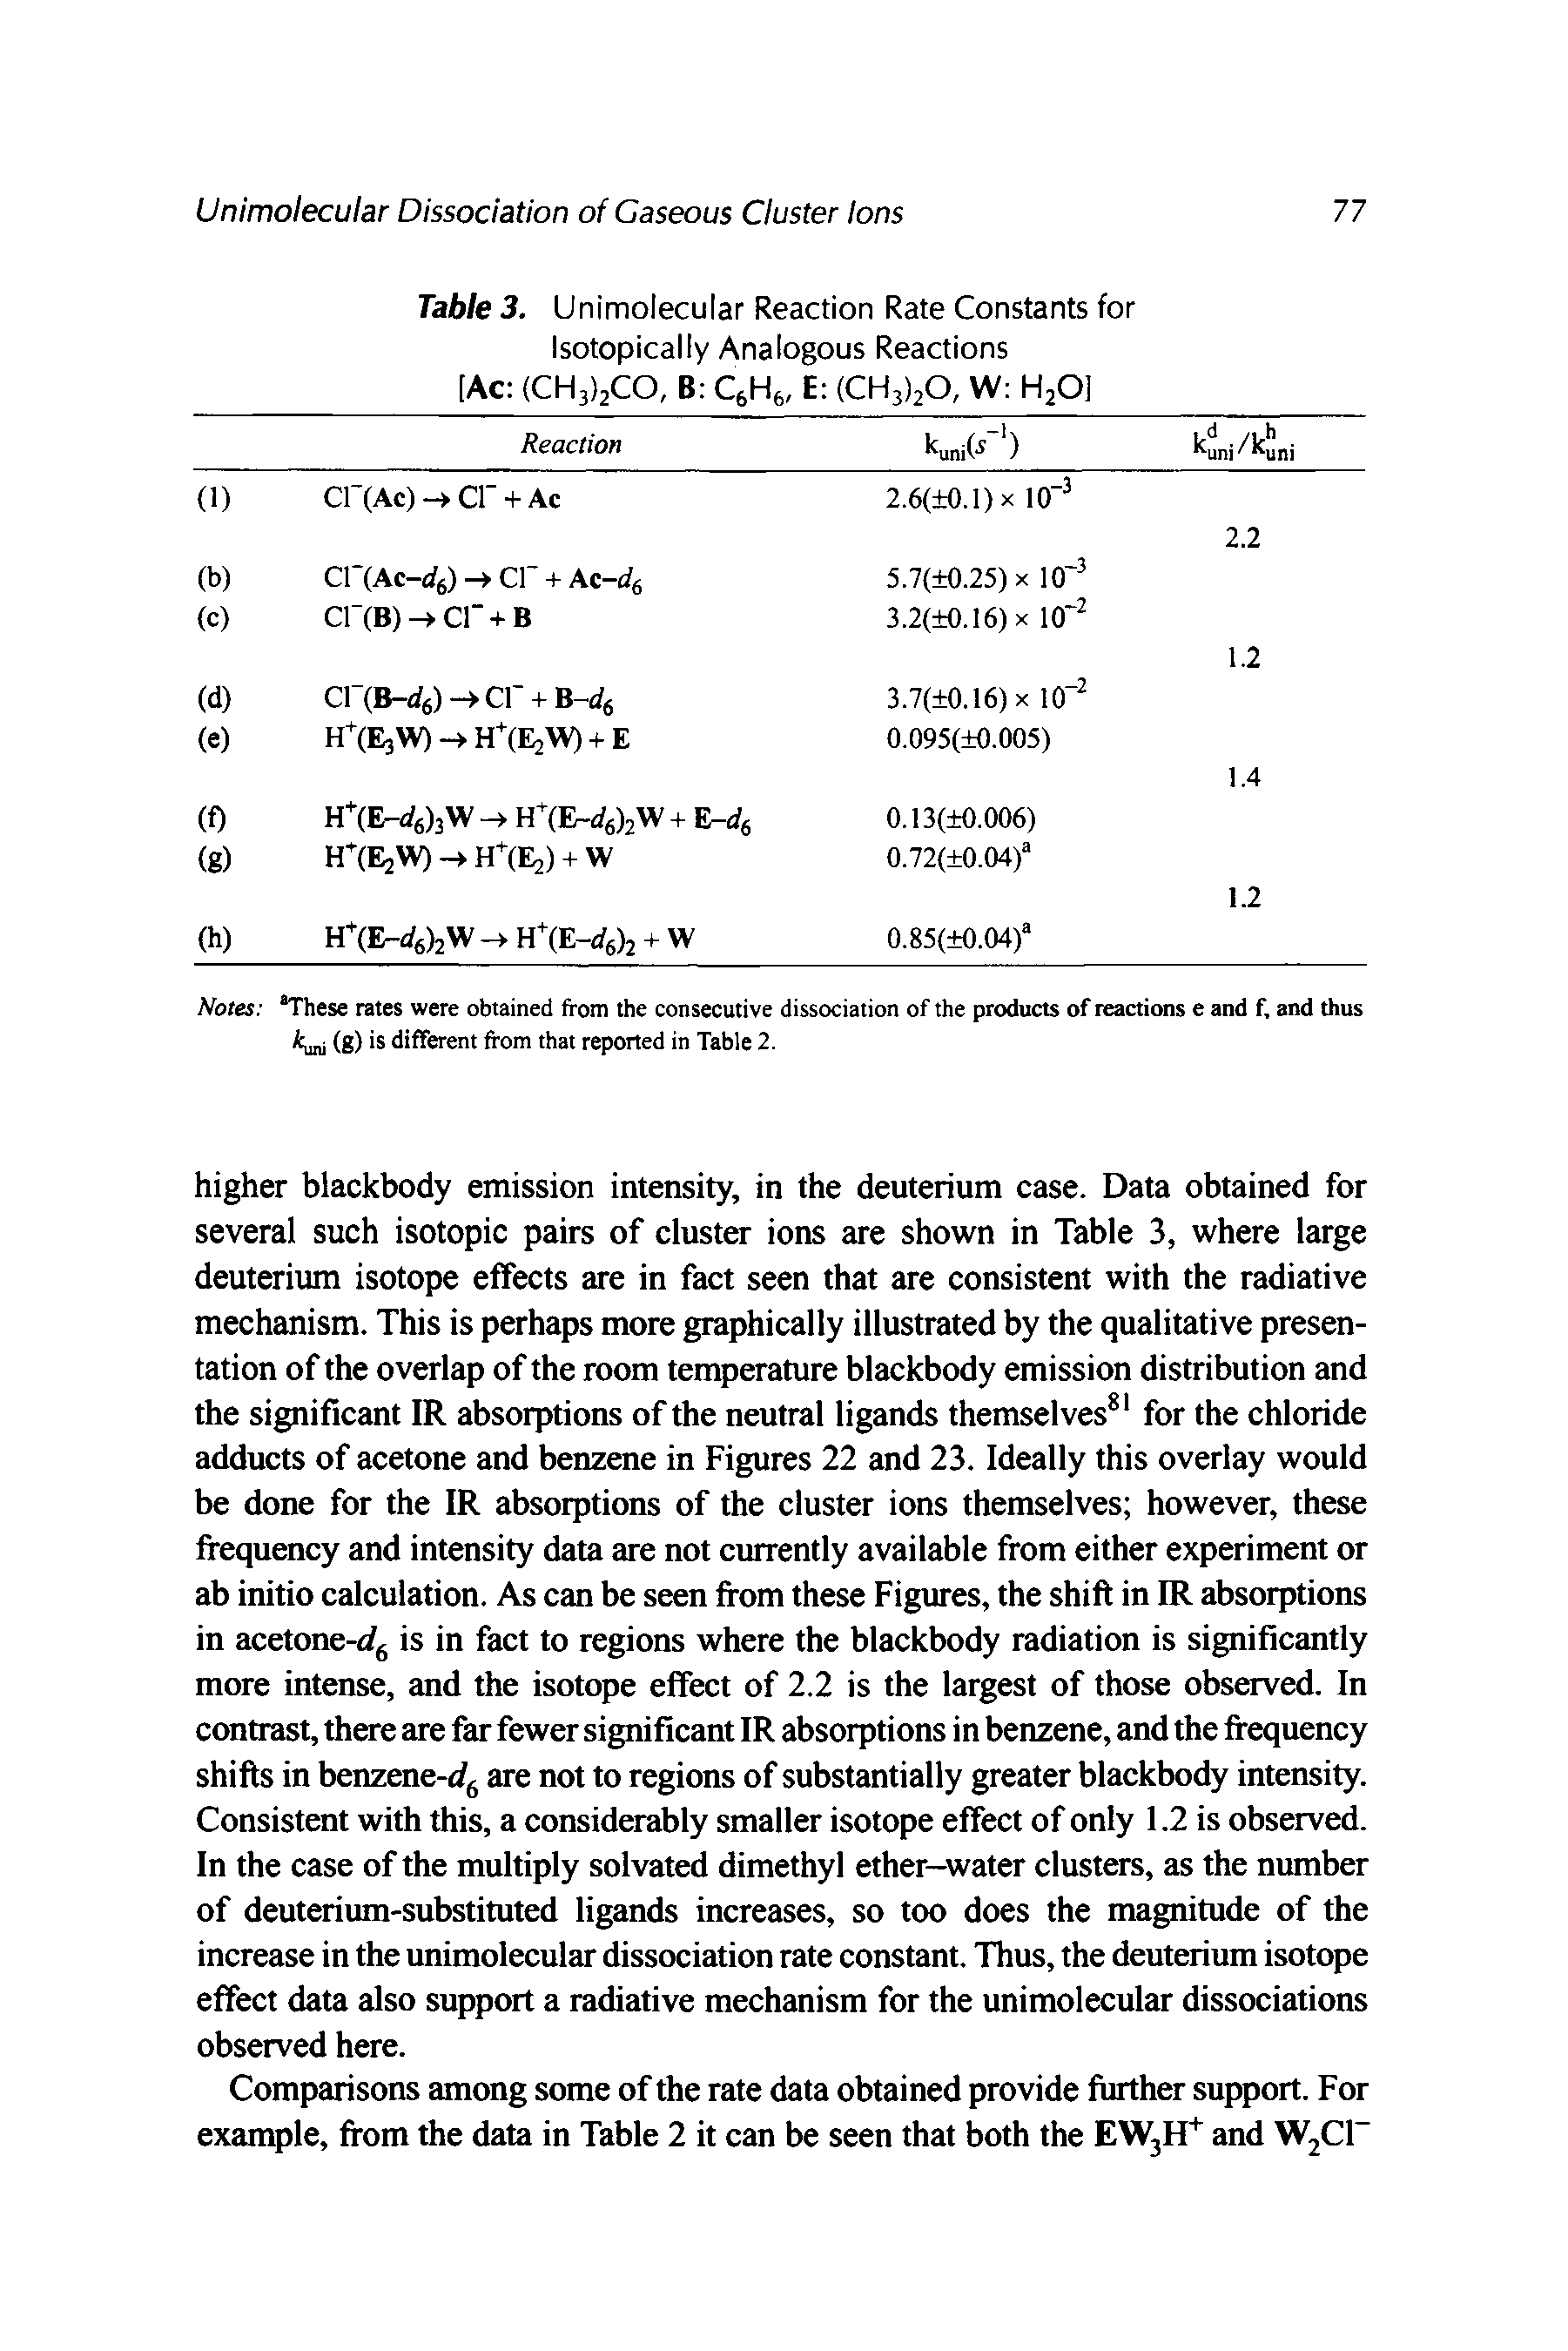 Table 3. Unimolecular Reaction Rate Constants for Isotopically Analogous Reactions [Ac (CHaljCO, B CeHe, E (CHjIjO, W HjO]...